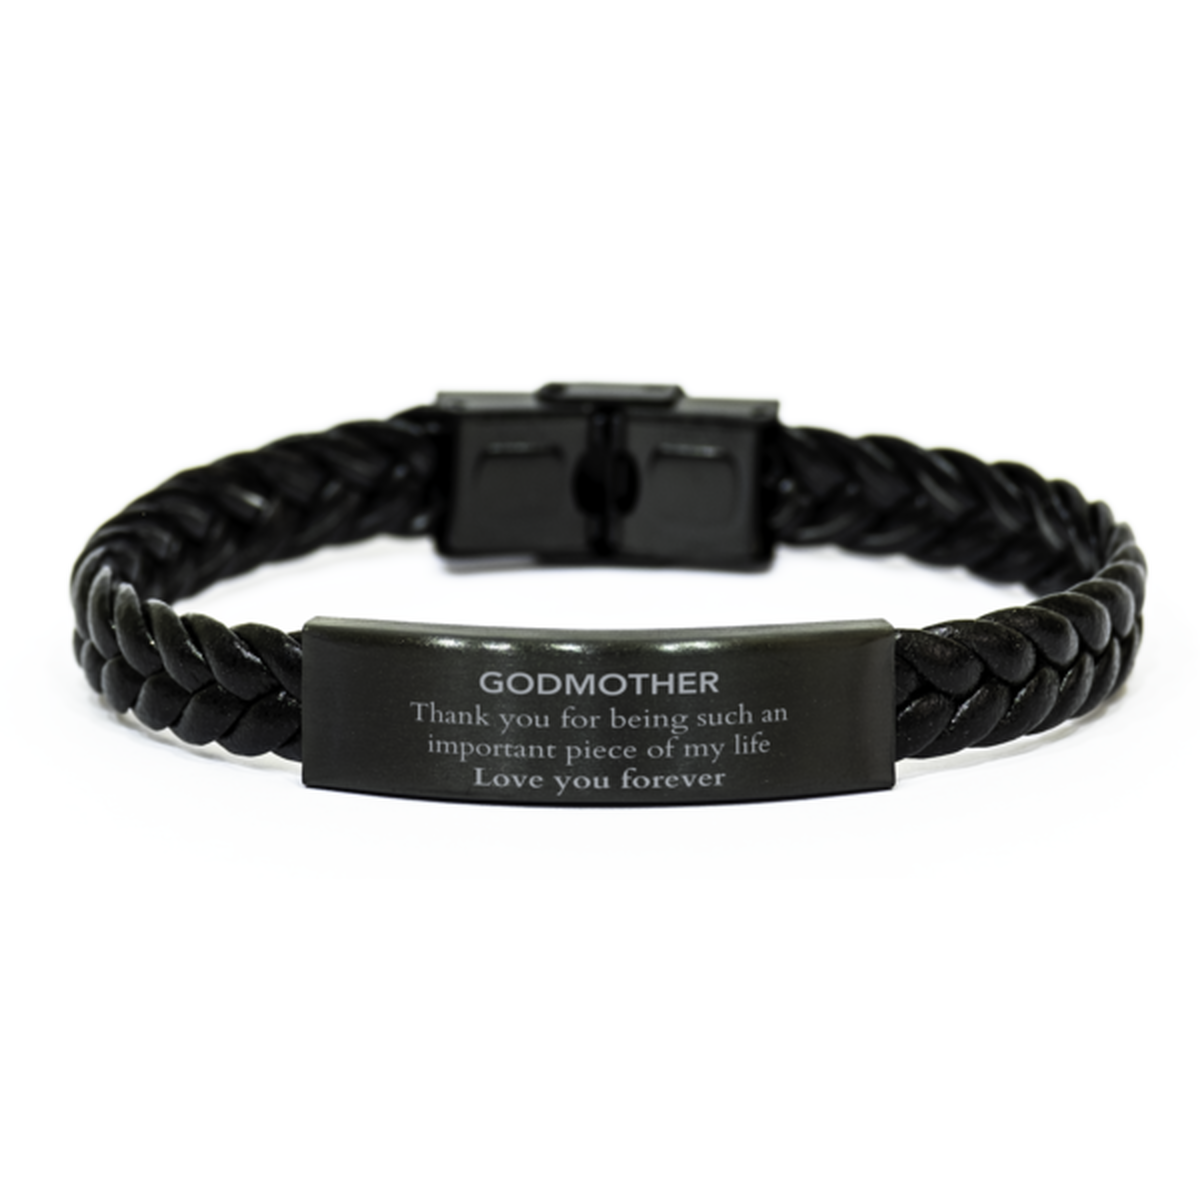 Appropriate Godmother Braided Leather Bracelet Epic Birthday Gifts for Godmother Thank you for being such an important piece of my life Godmother Christmas Mothers Fathers Day